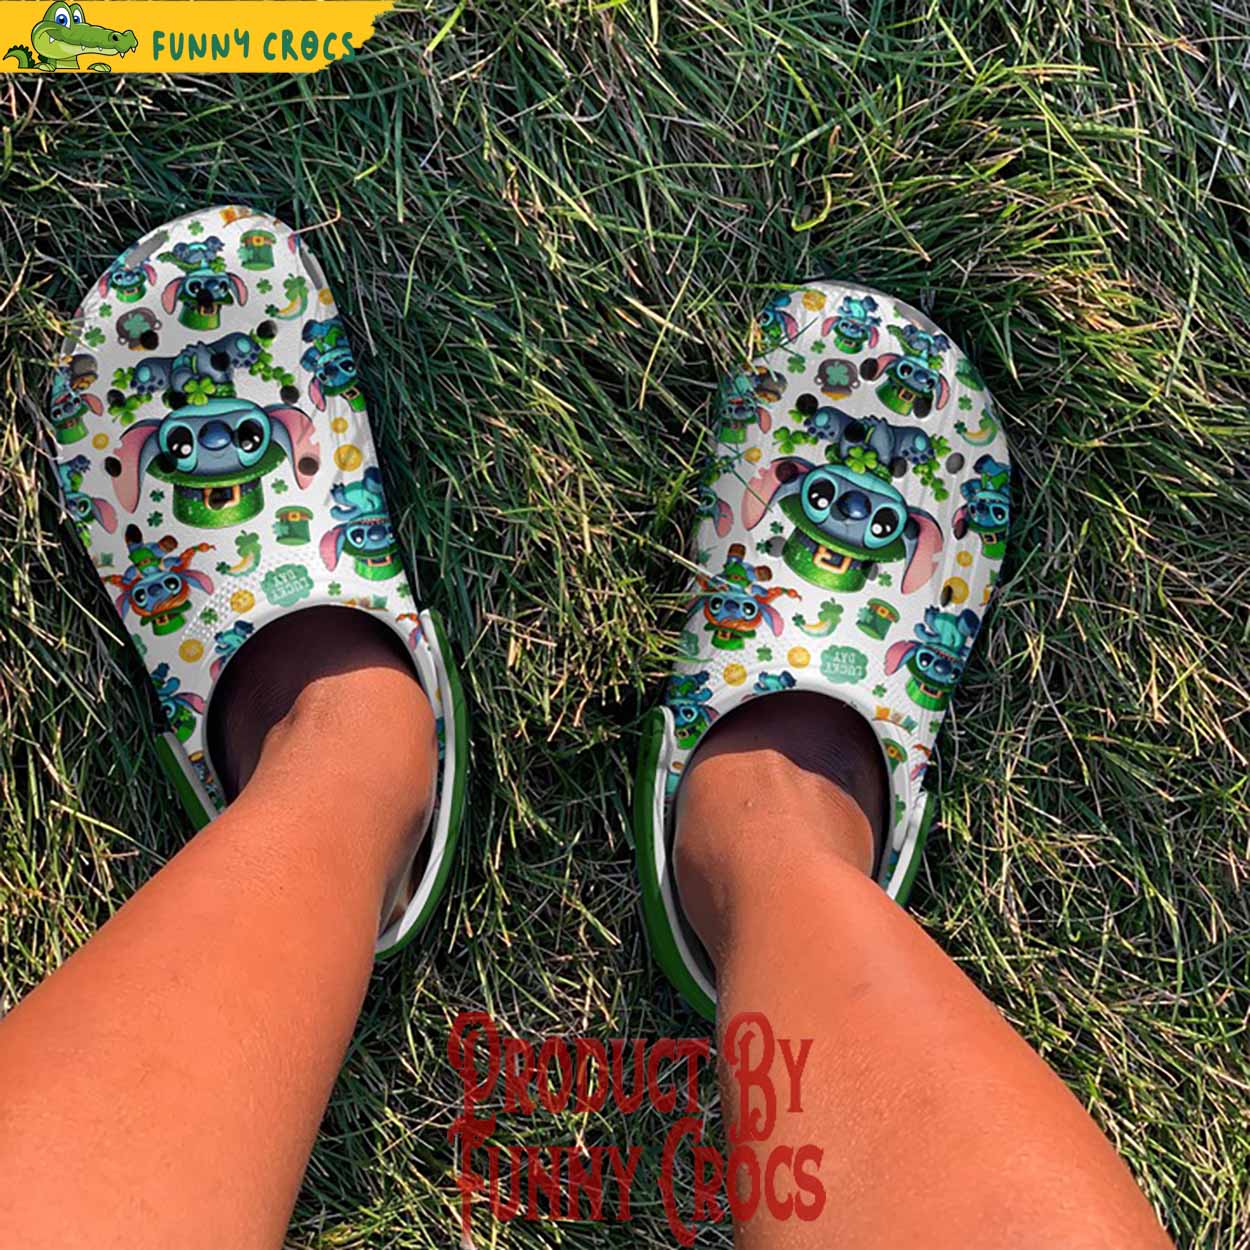 Too Cute To Pinch Happy St.Patrick's Day Crocs